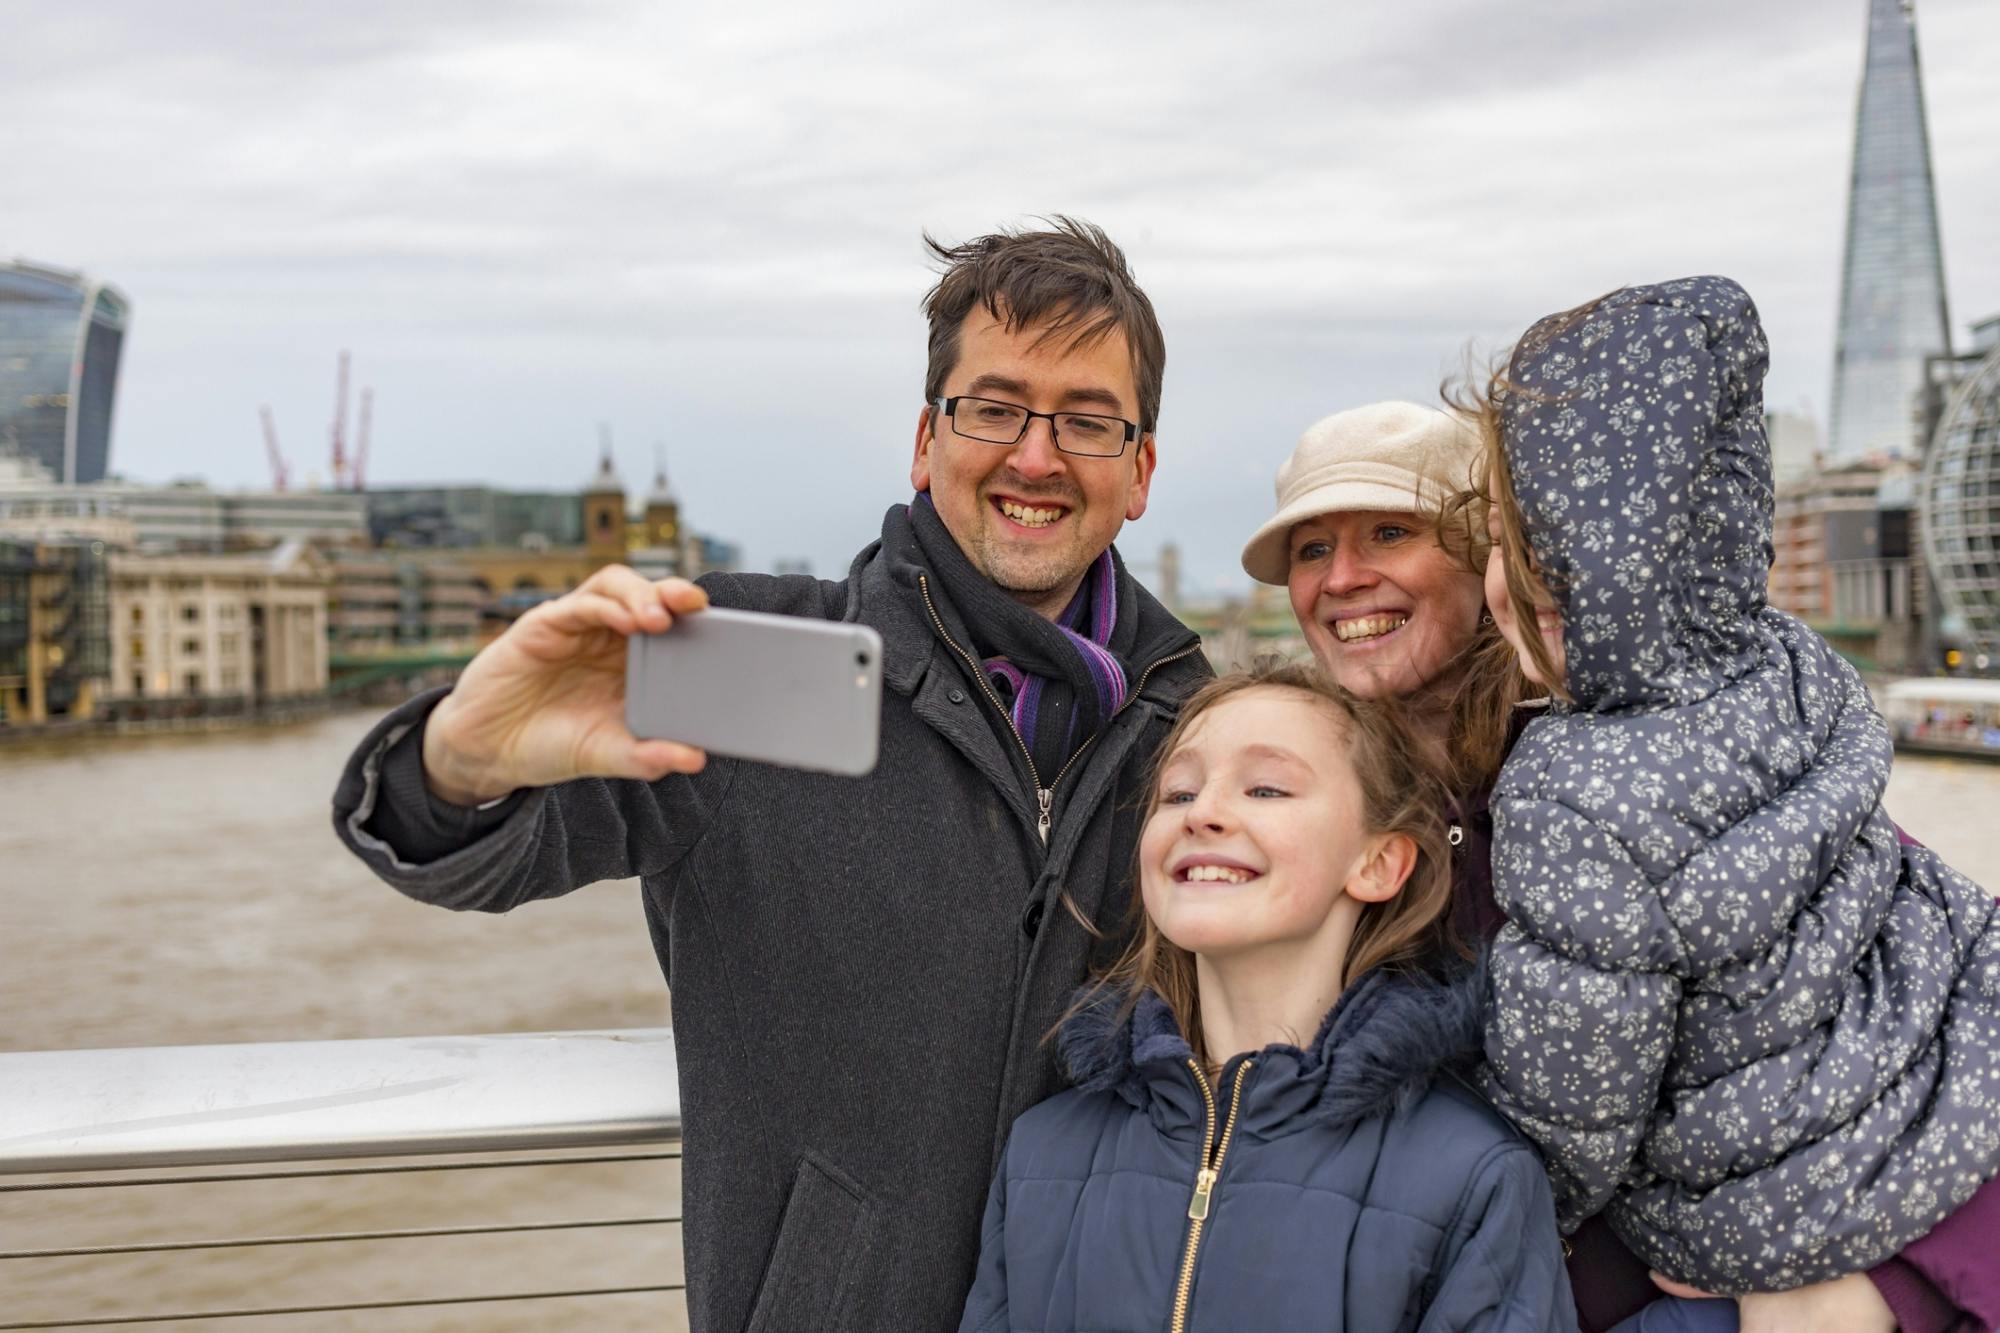 Family walking tour in London with a guide